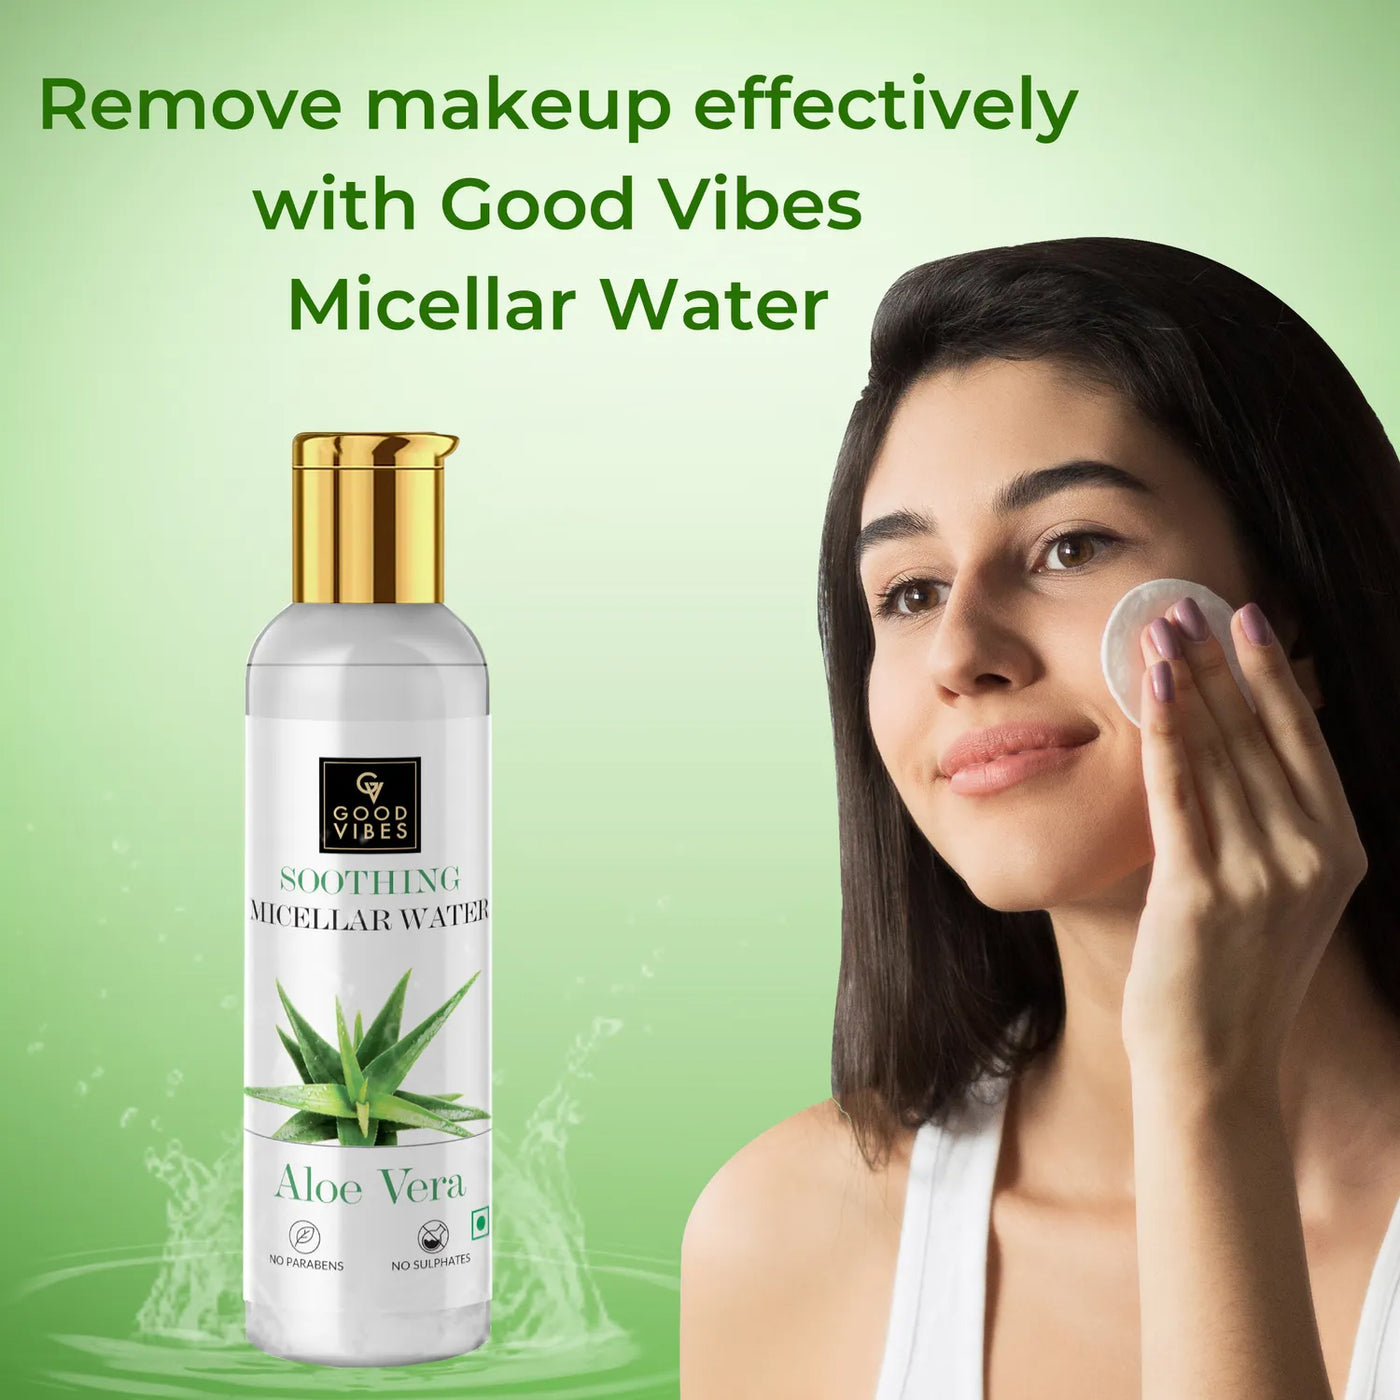 Soothing Micellar Water with Aloe Vera Extract